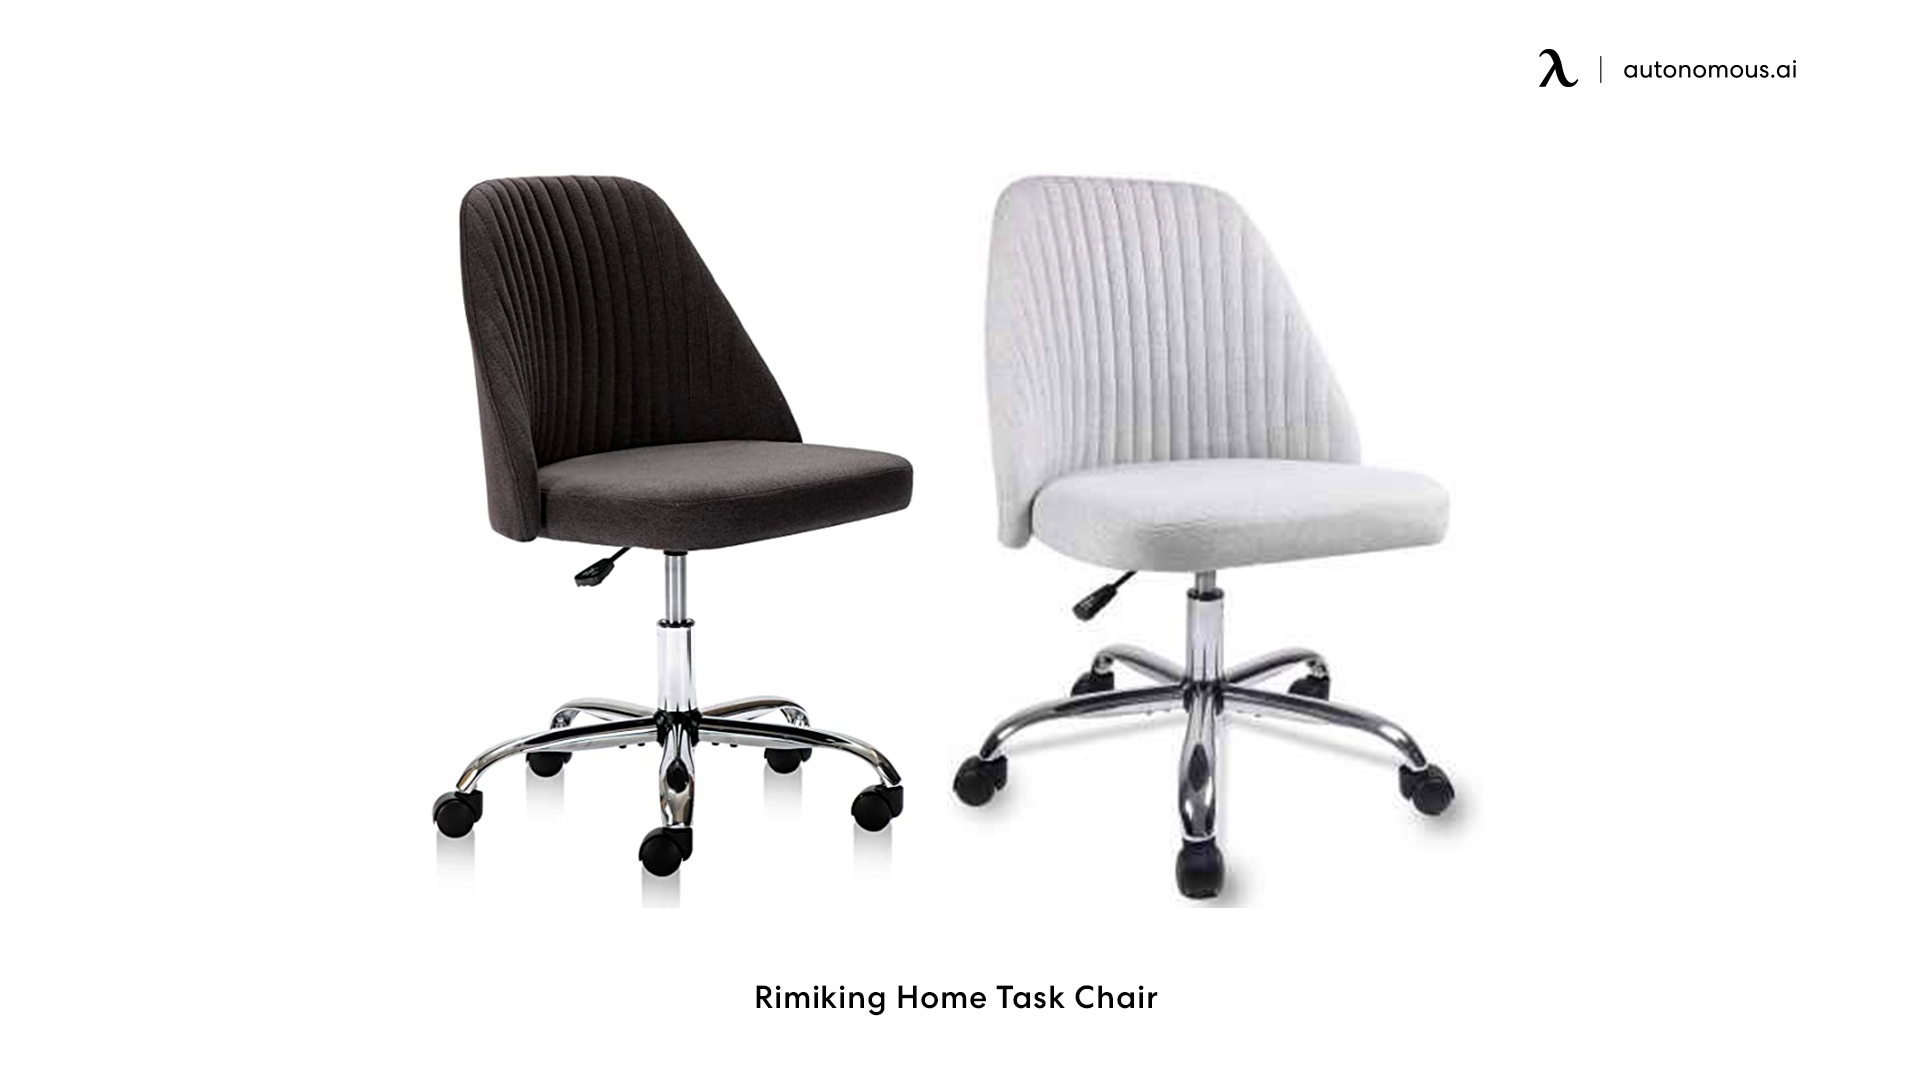 Rimiking Home petite office chair